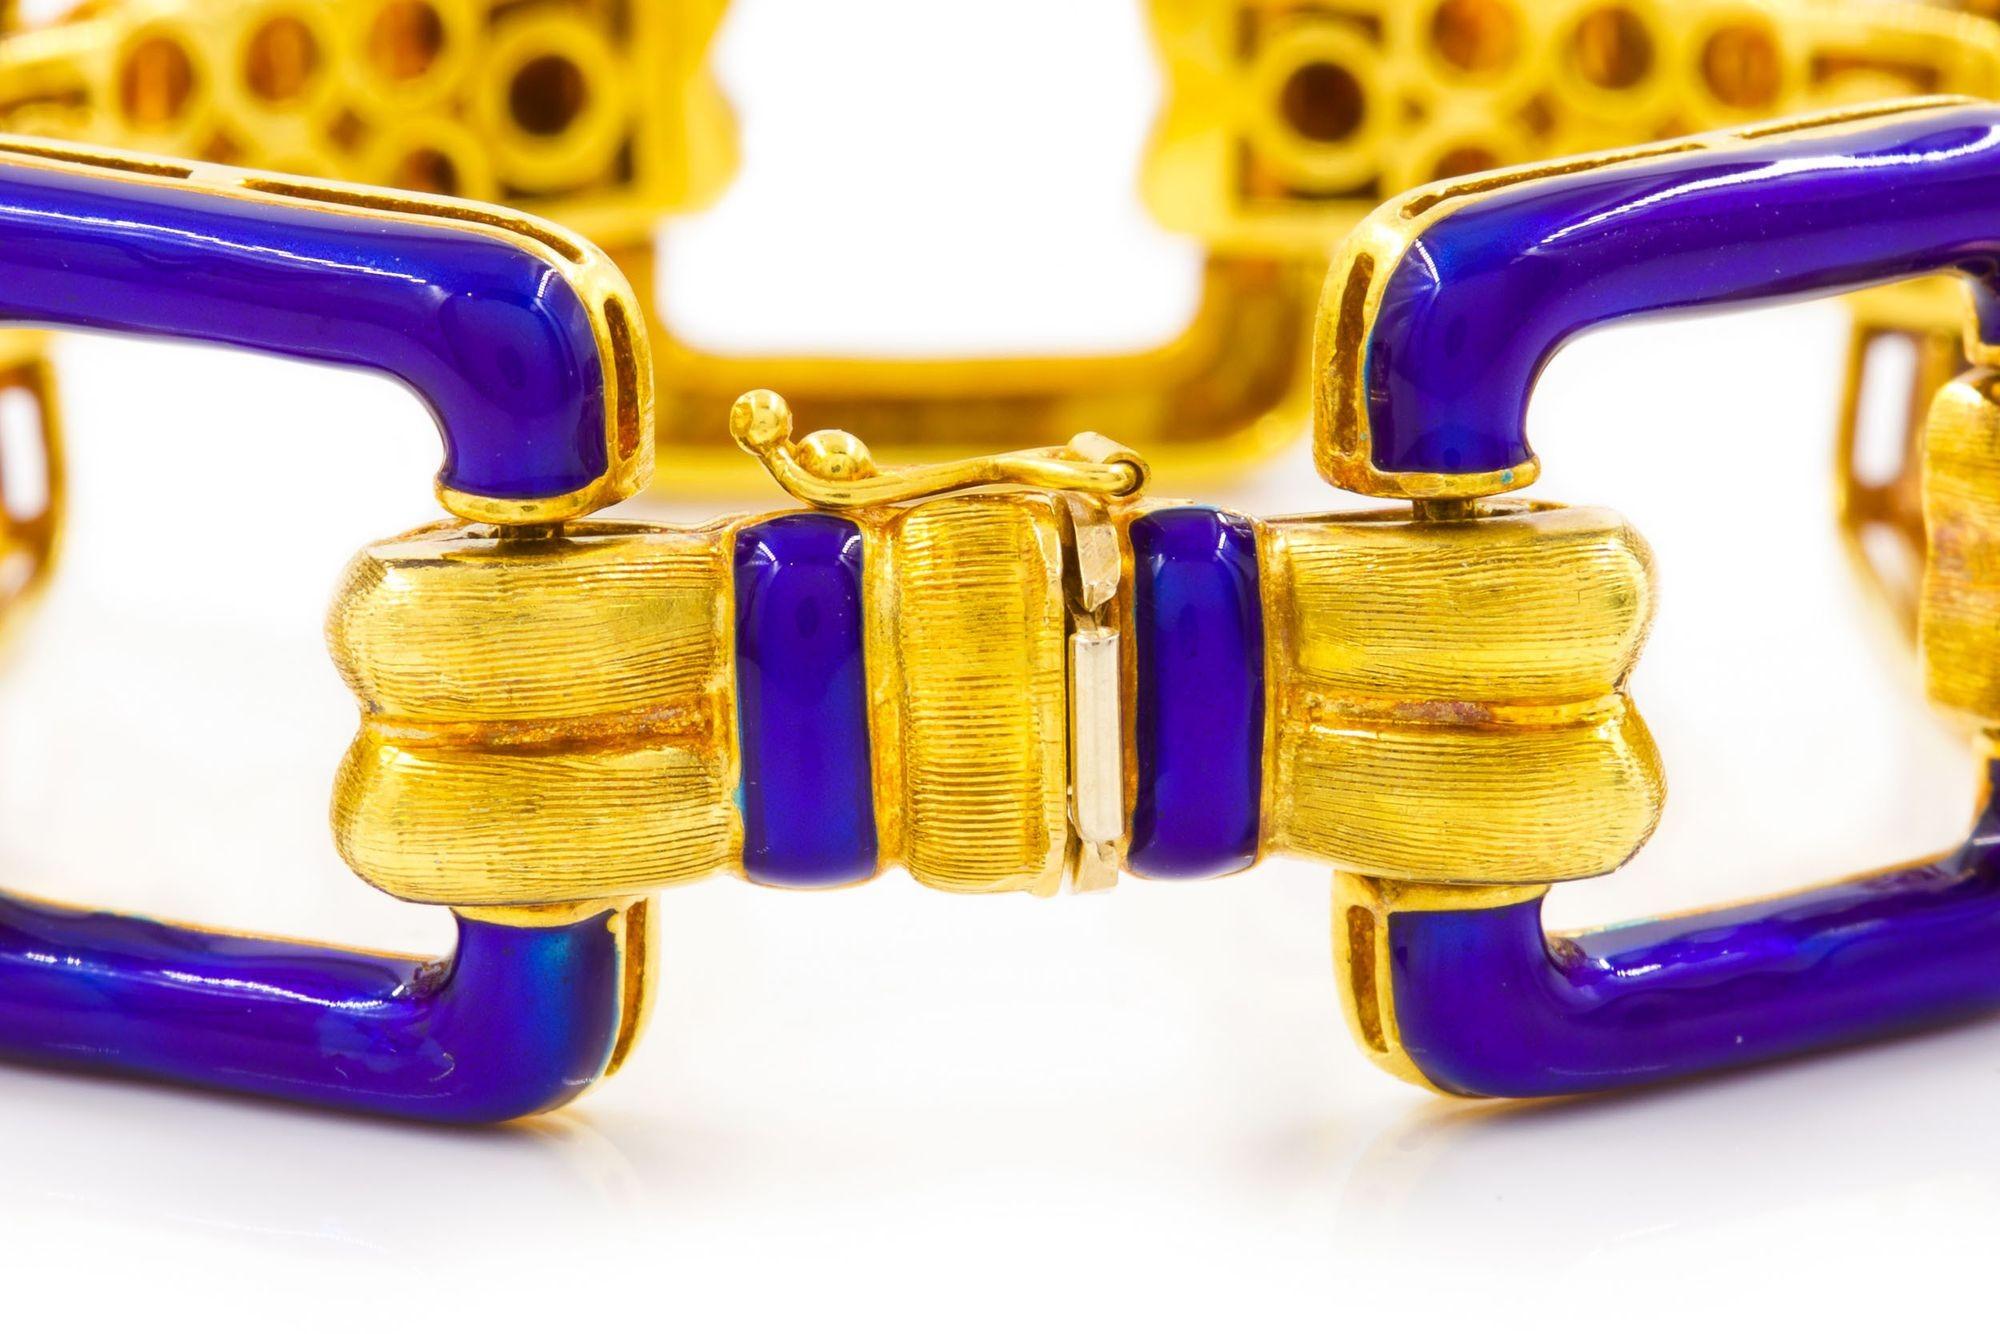 Vintage Italian 18k Yellow Gold and Cobalt Blue Enamel Bracelet by Uno-A-Erre In Good Condition For Sale In Shippensburg, PA